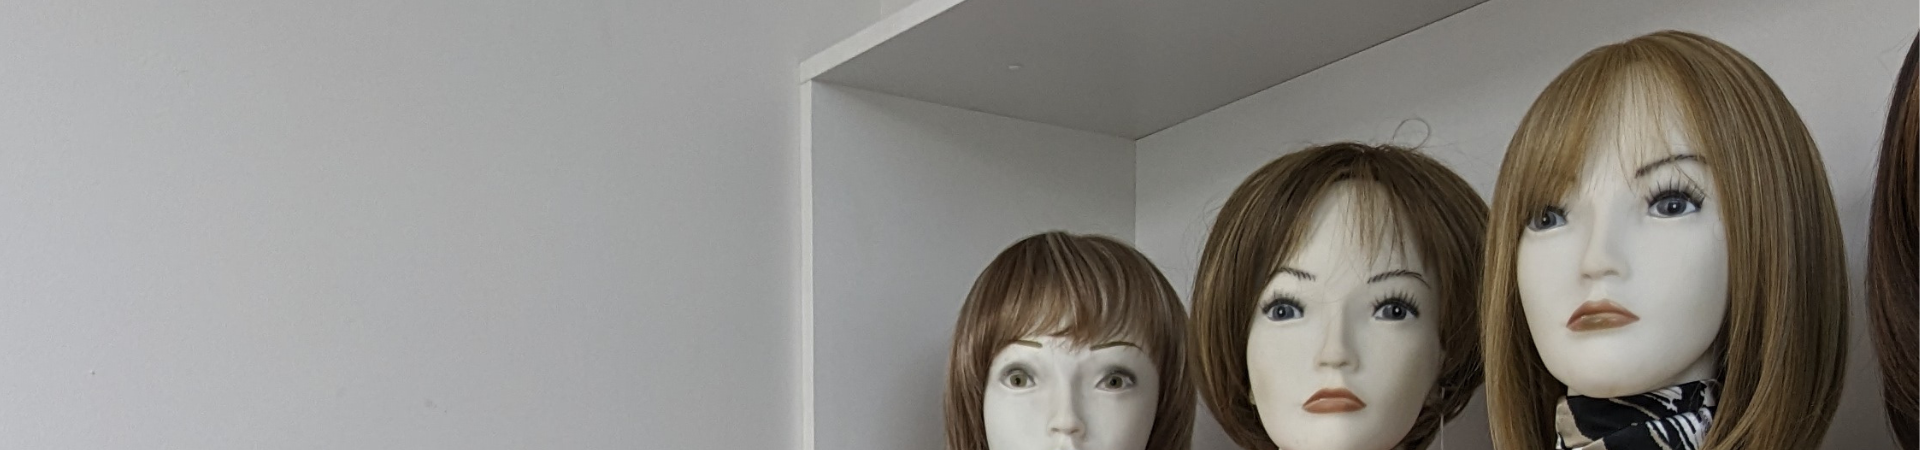 Mannequins with wigs